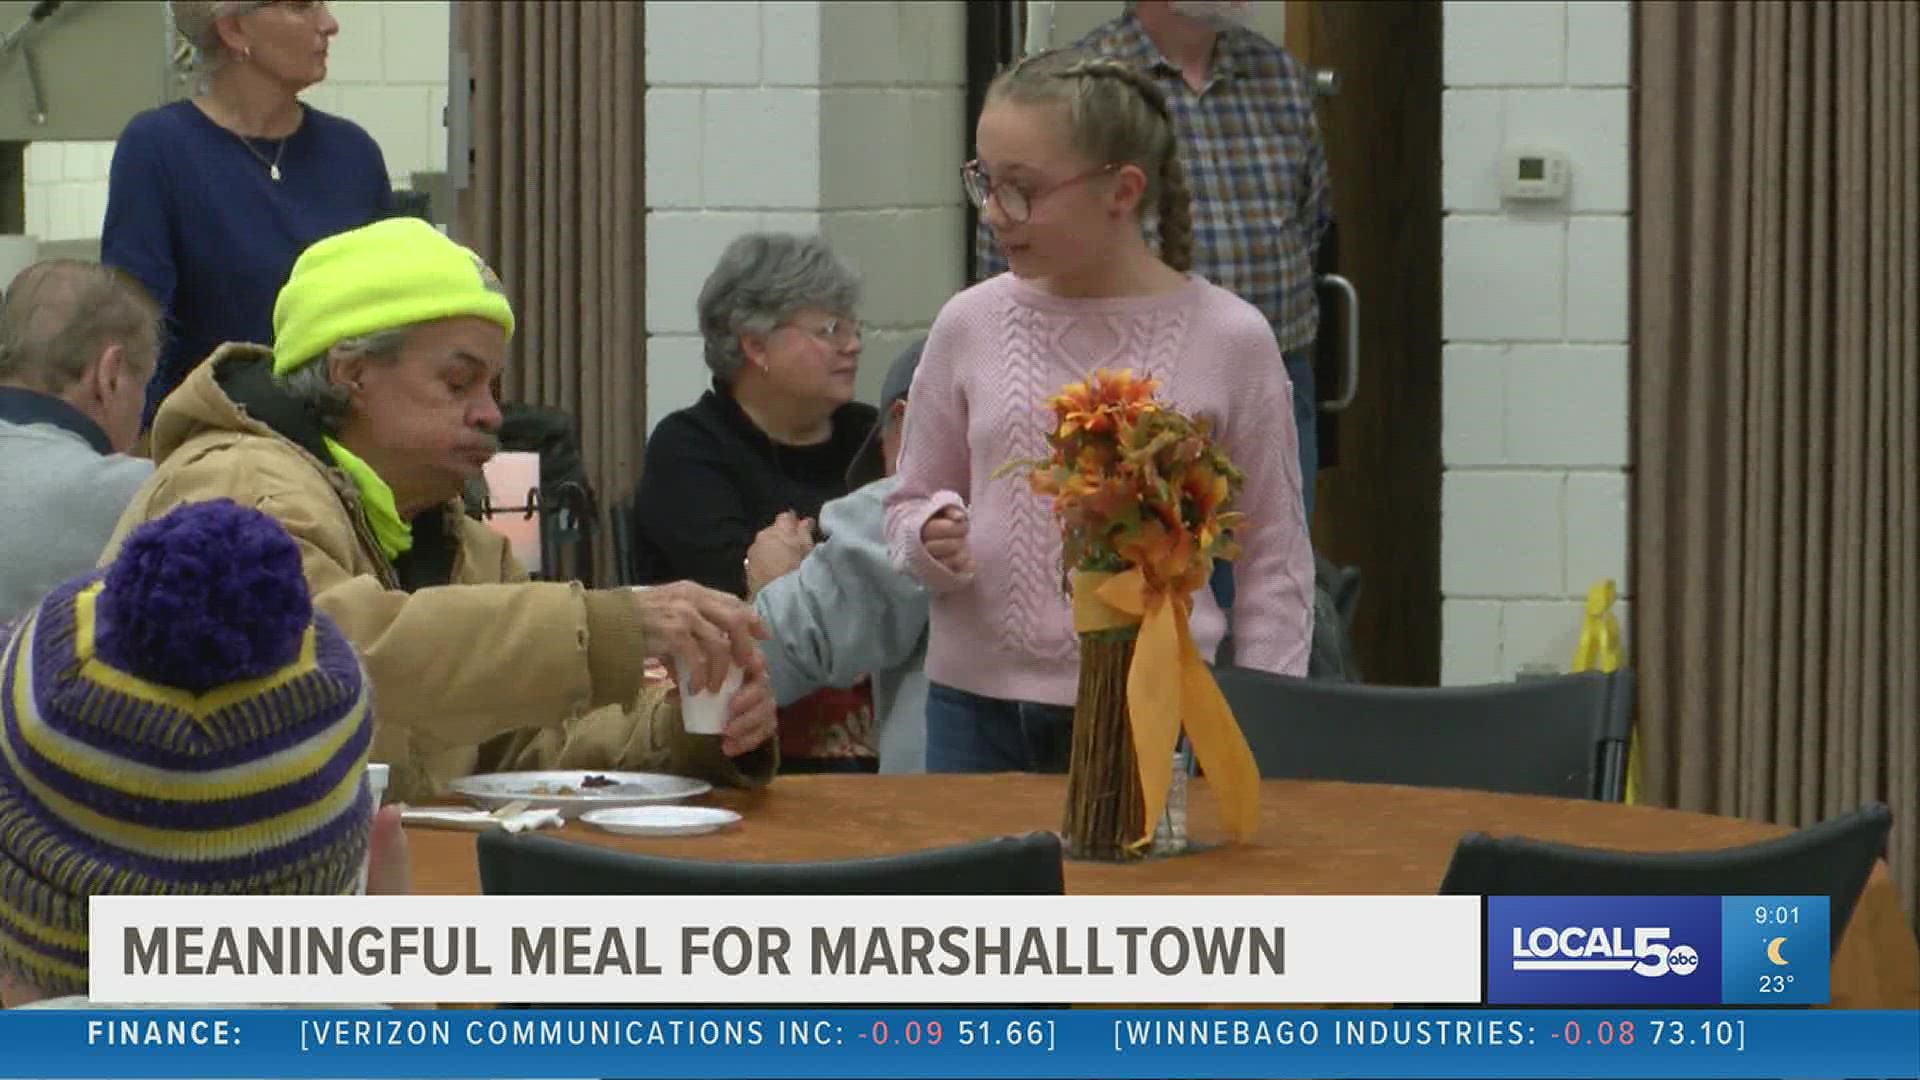 The Thanksgiving tradition for The Salvation Army returned after being hiatus due to COVID-19.